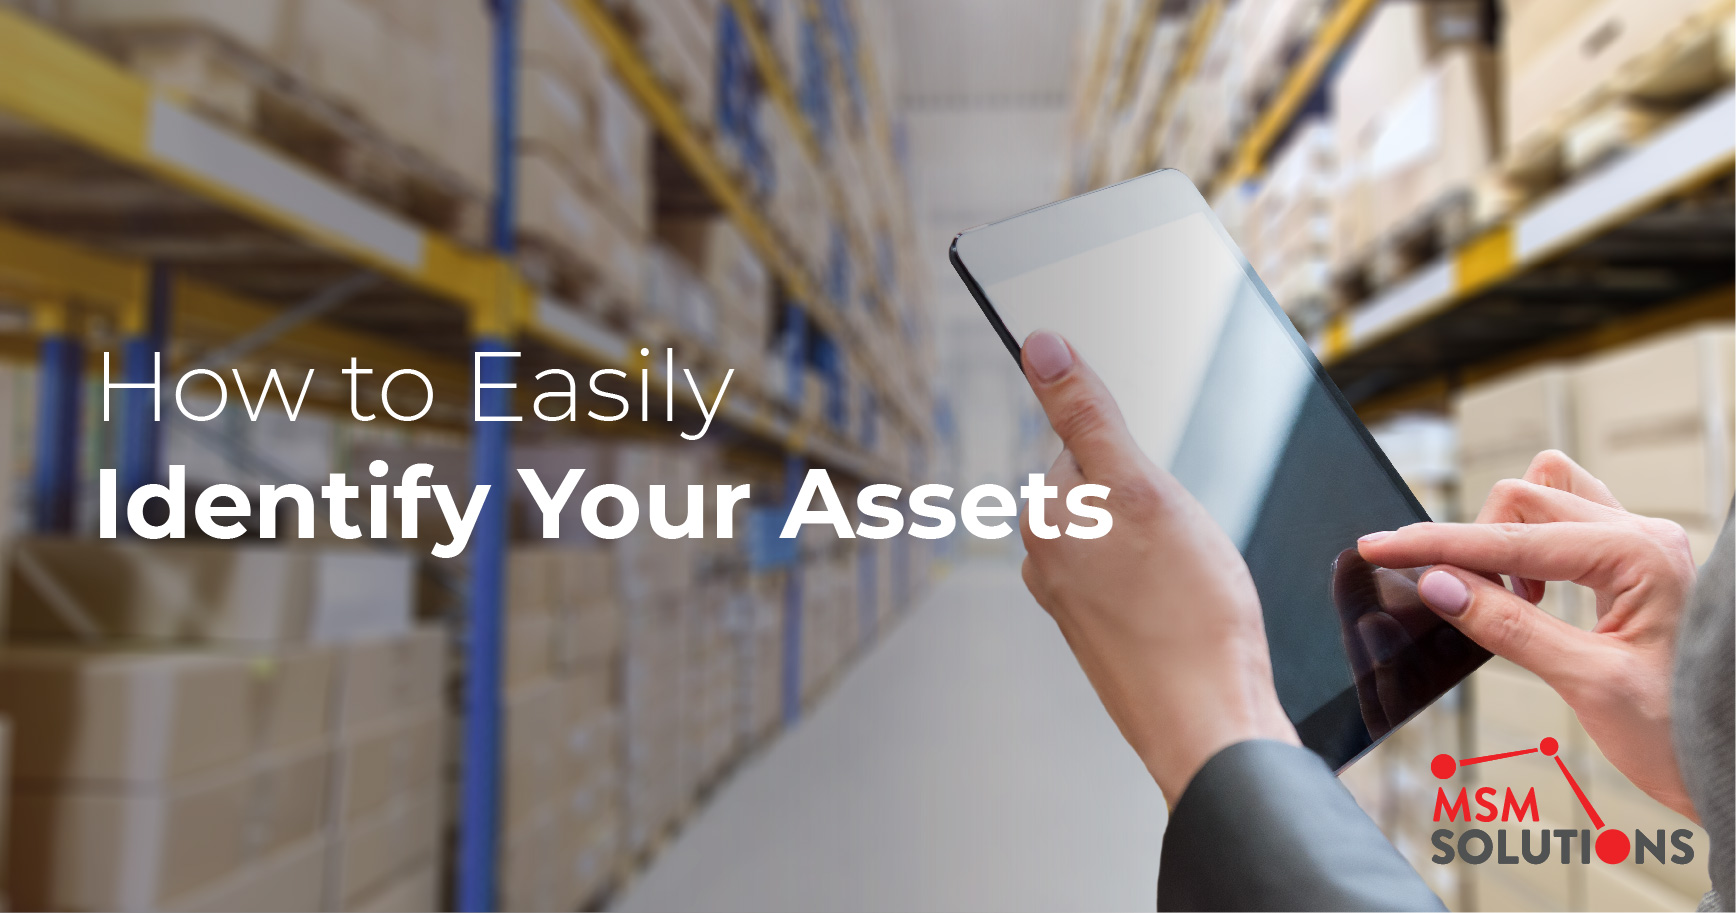 How to Easily Identify Your Assets